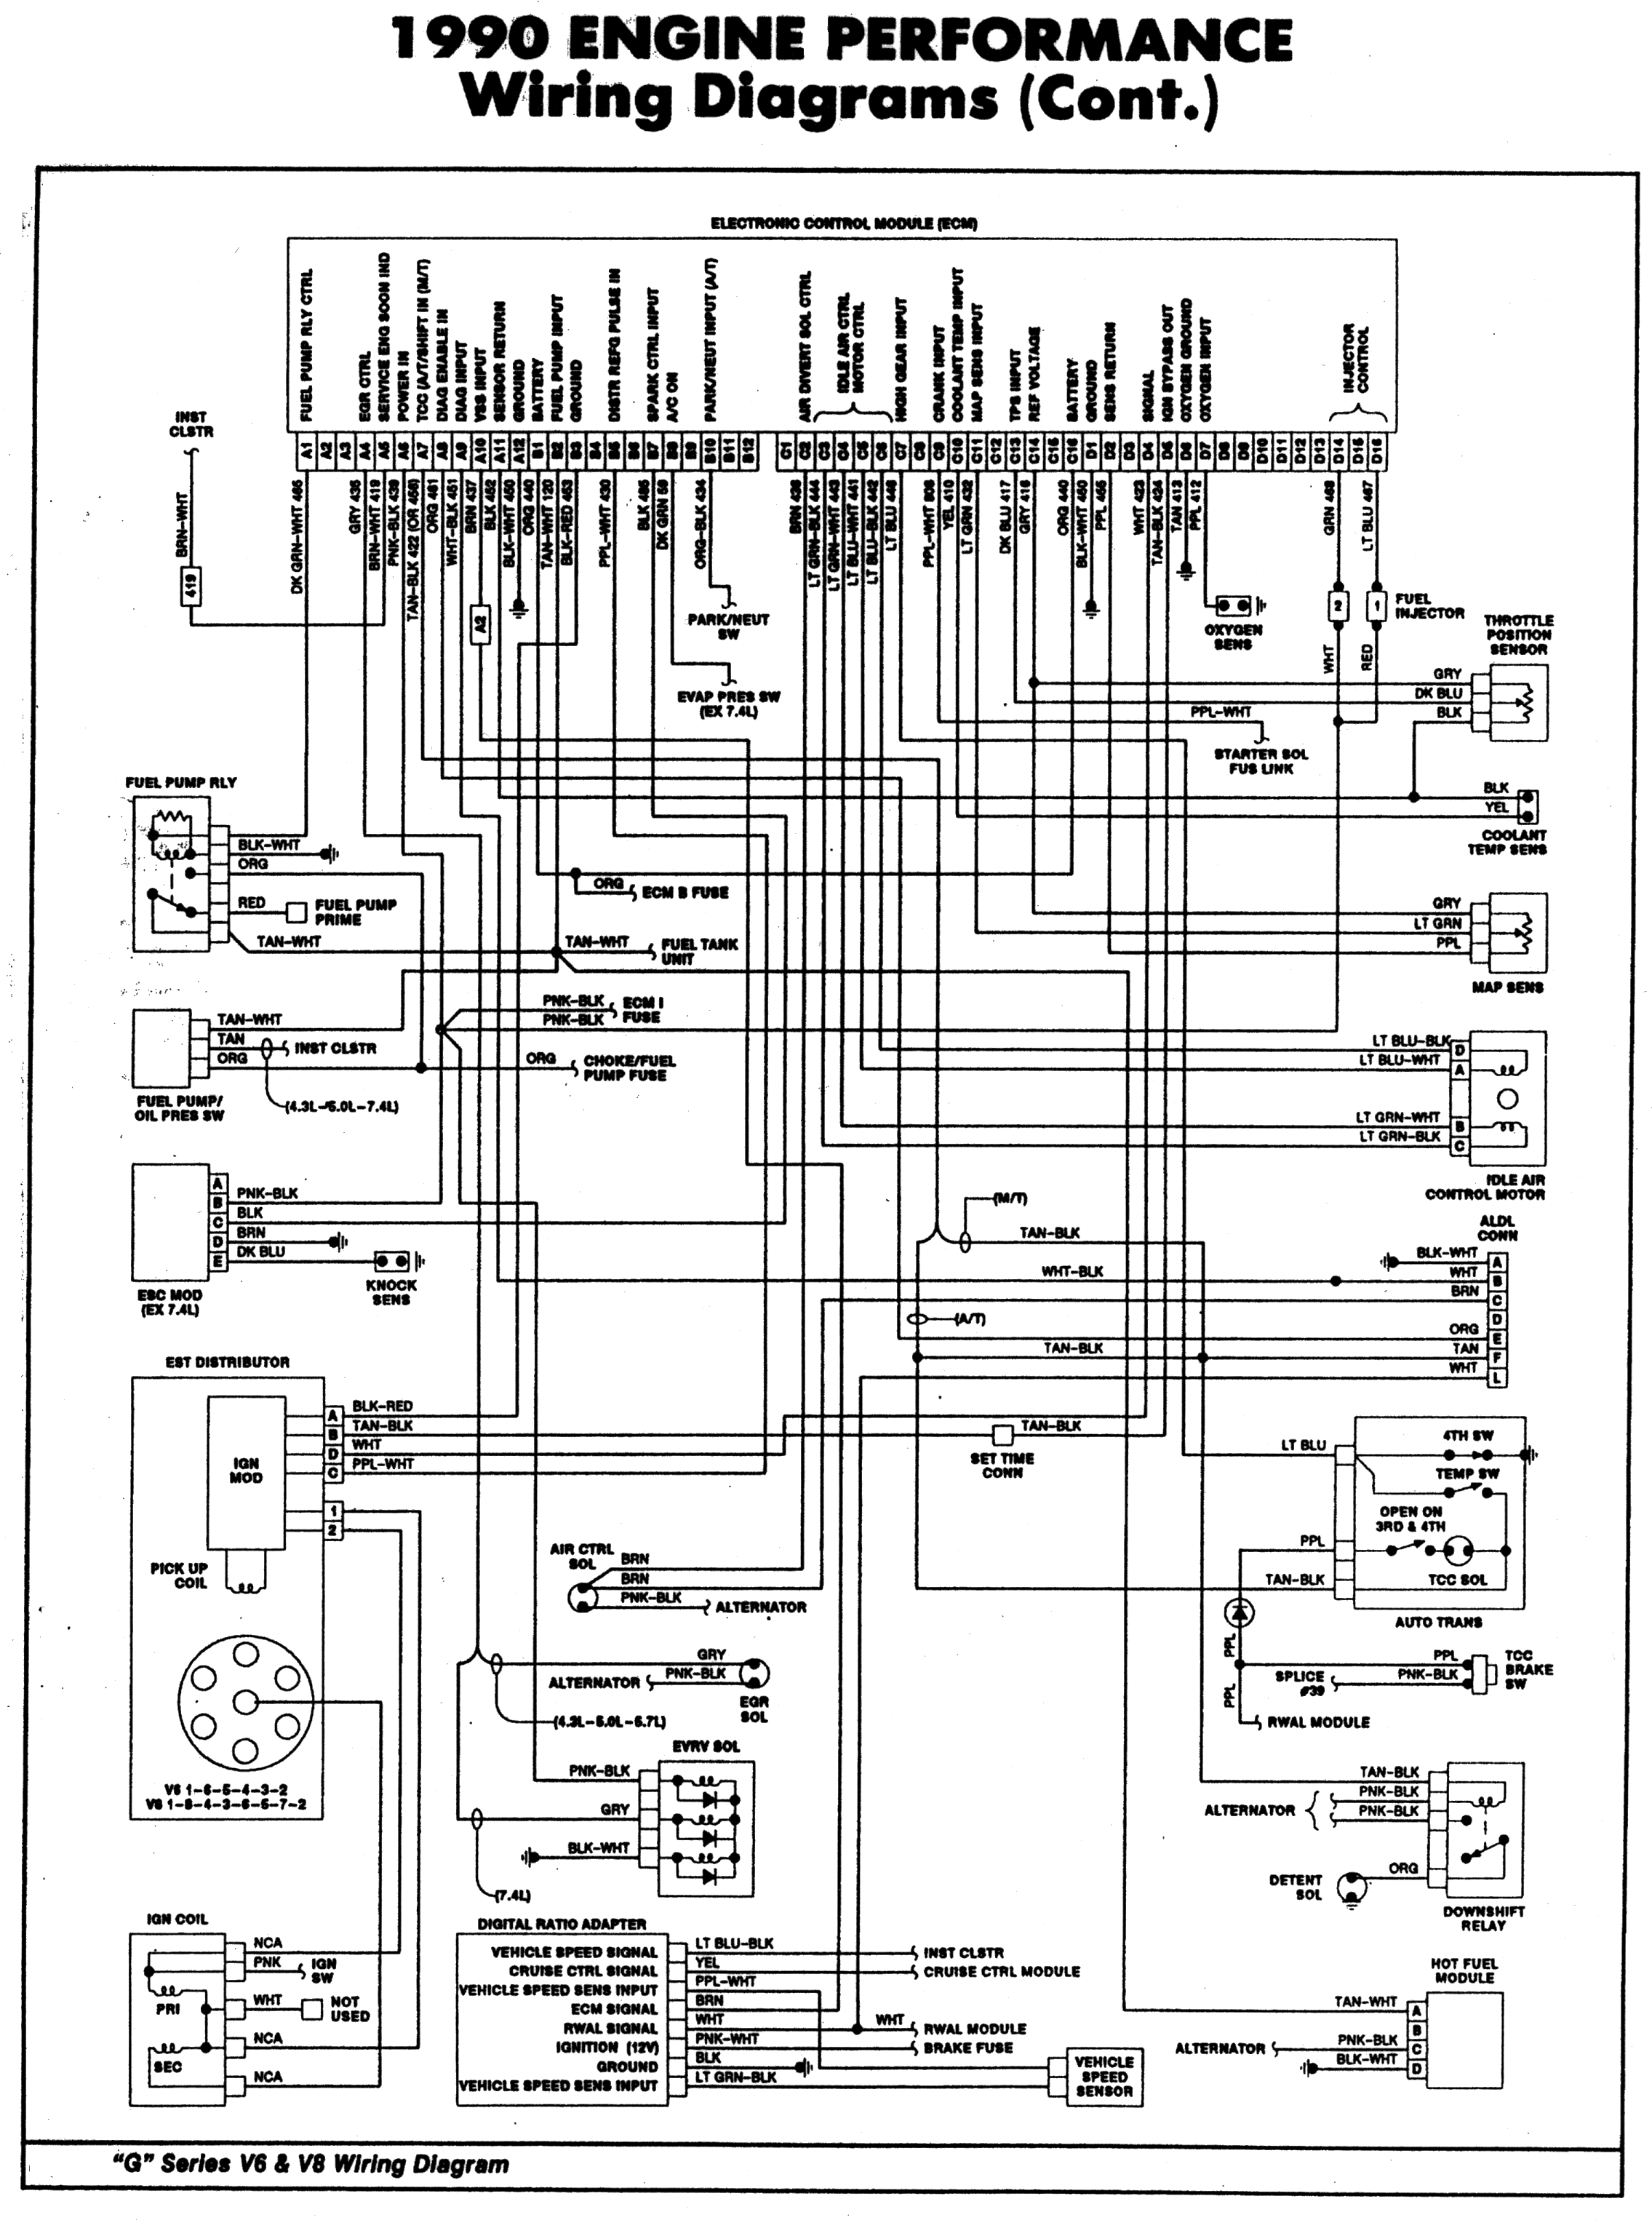 90 Chevy Truck Wiring Diagram - Wiring Diagram Explained - 1990 Chevy 1500 Fuel Pump Wiring Diagram